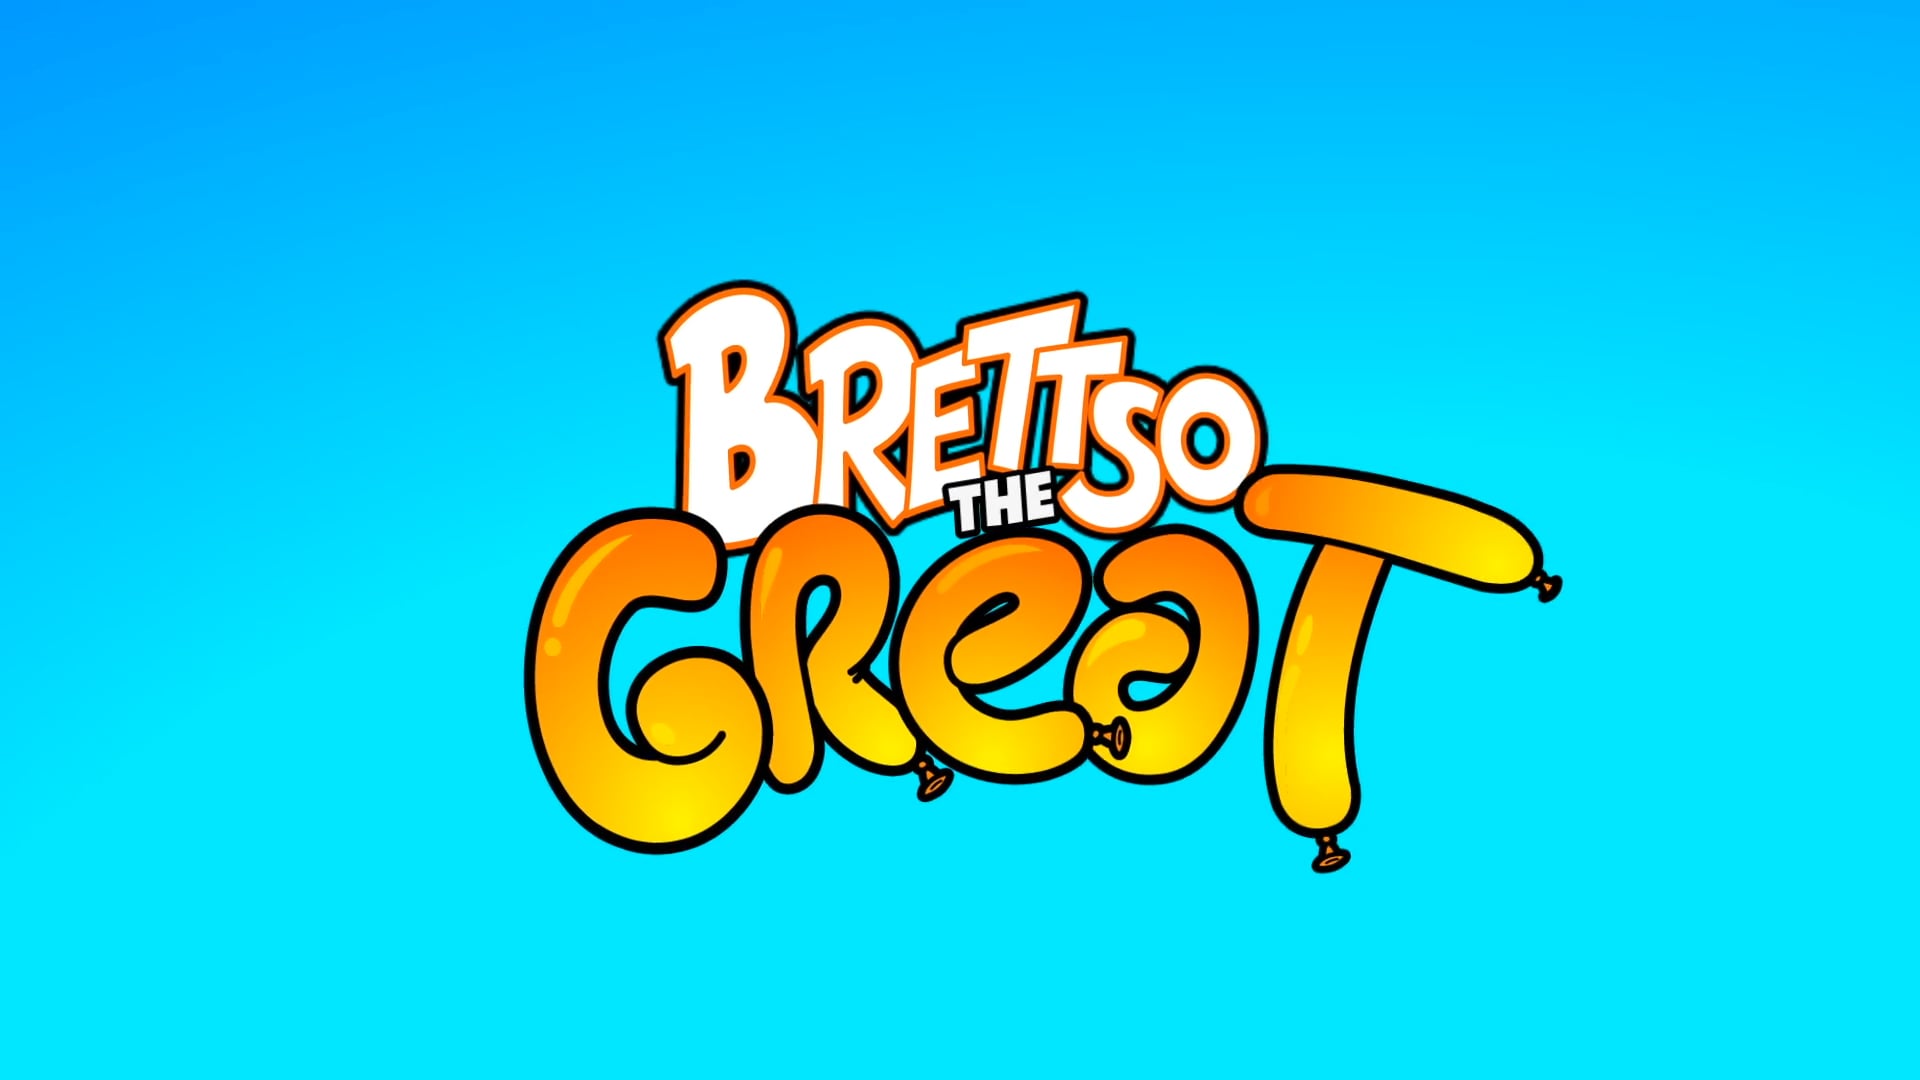 Promotional video thumbnail 1 for Brettso The Great